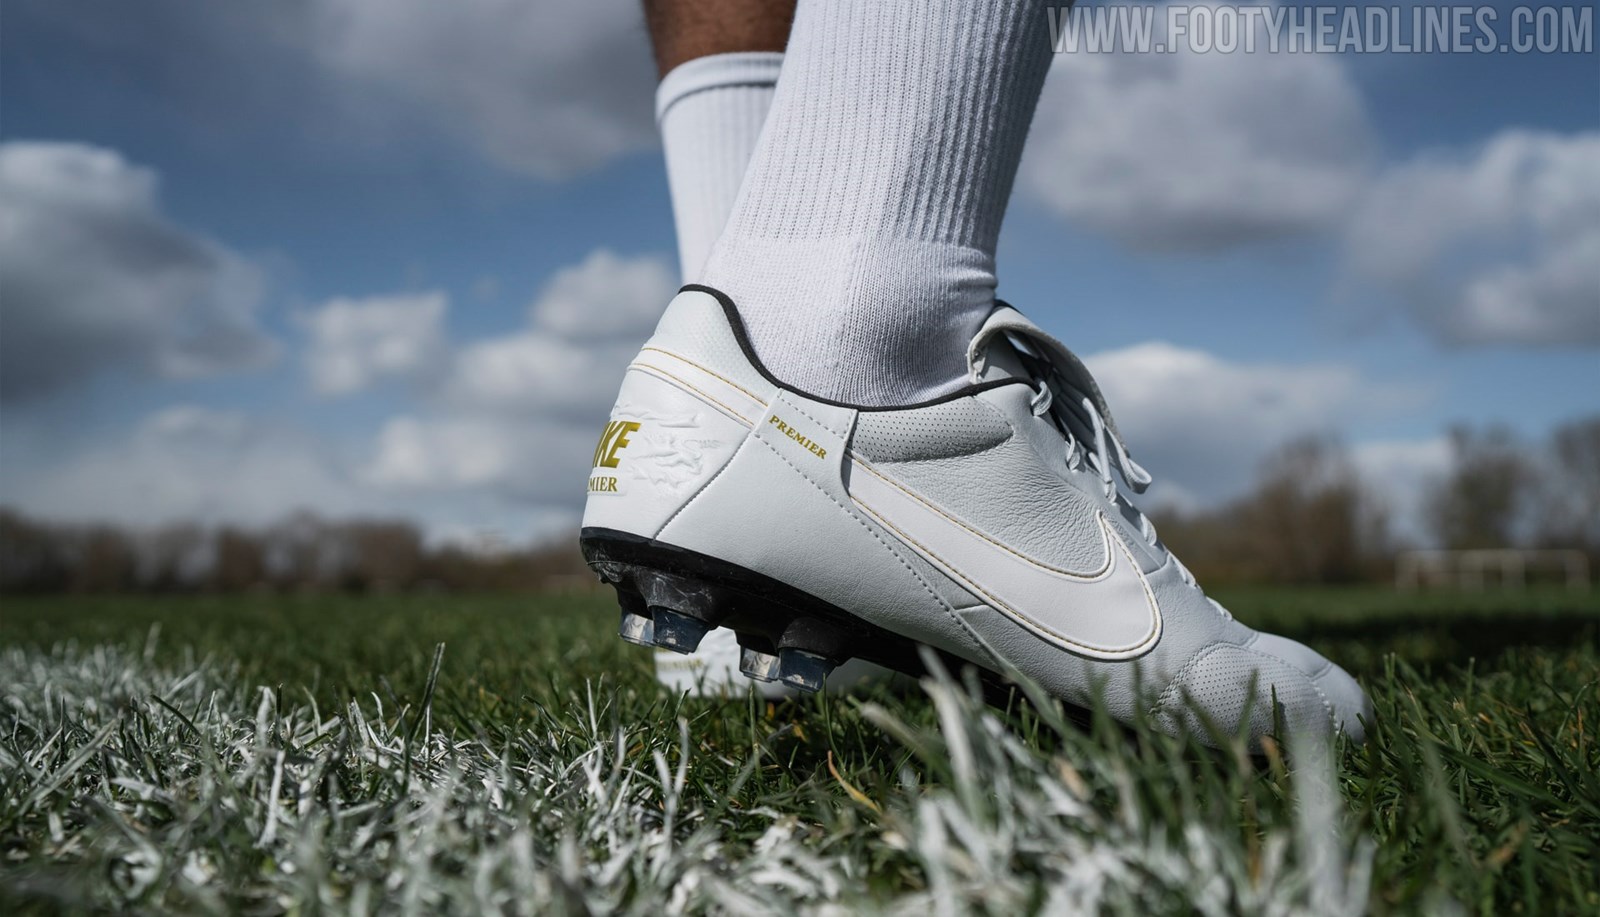 No K-Leather: Next Gen Tiempo to be Made with Synthetic Materials Footy Headlines